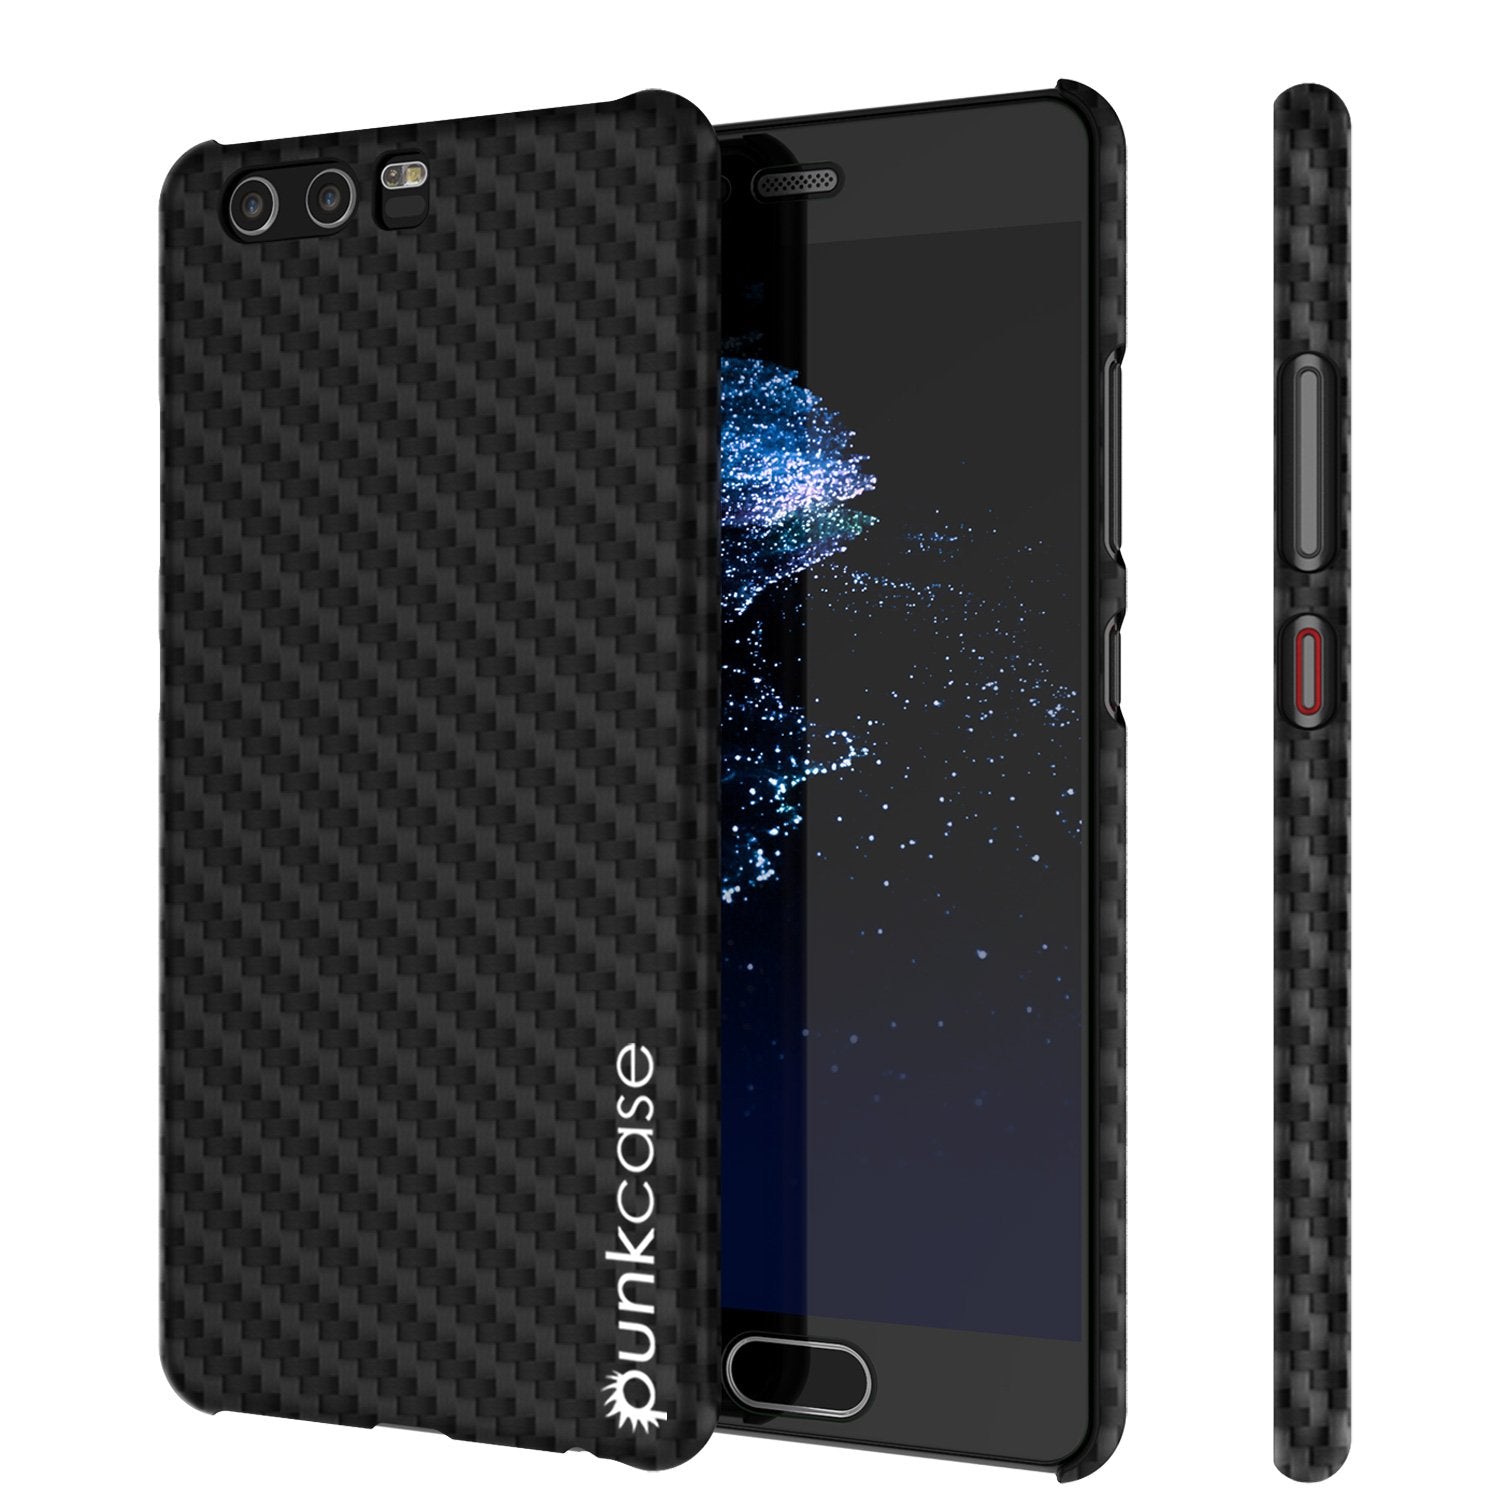 Huawei P10 Case, Punkcase CarbonShield, Heavy Duty & Ultra Thin 2 Piece Dual Layer PU Leather Cover [shockproof] [non slip] with Tempered Glass Screen Protector for Huawei P10 [Jet Black]